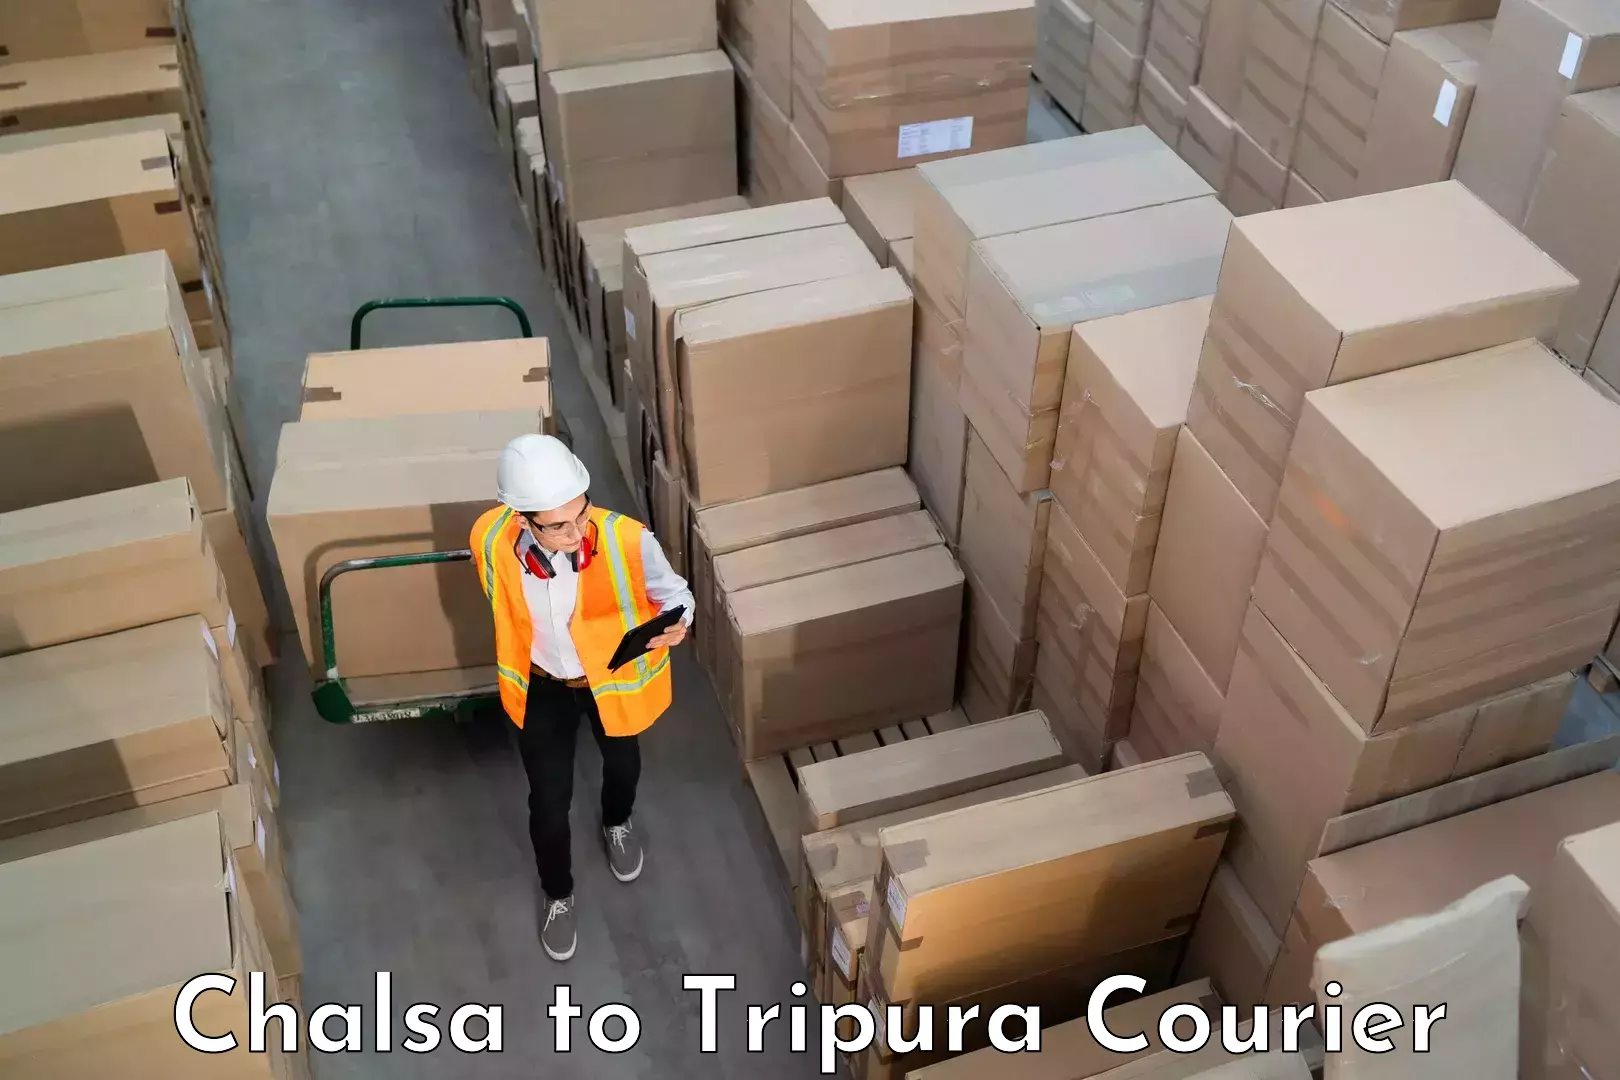 Luggage shipment specialists Chalsa to North Tripura